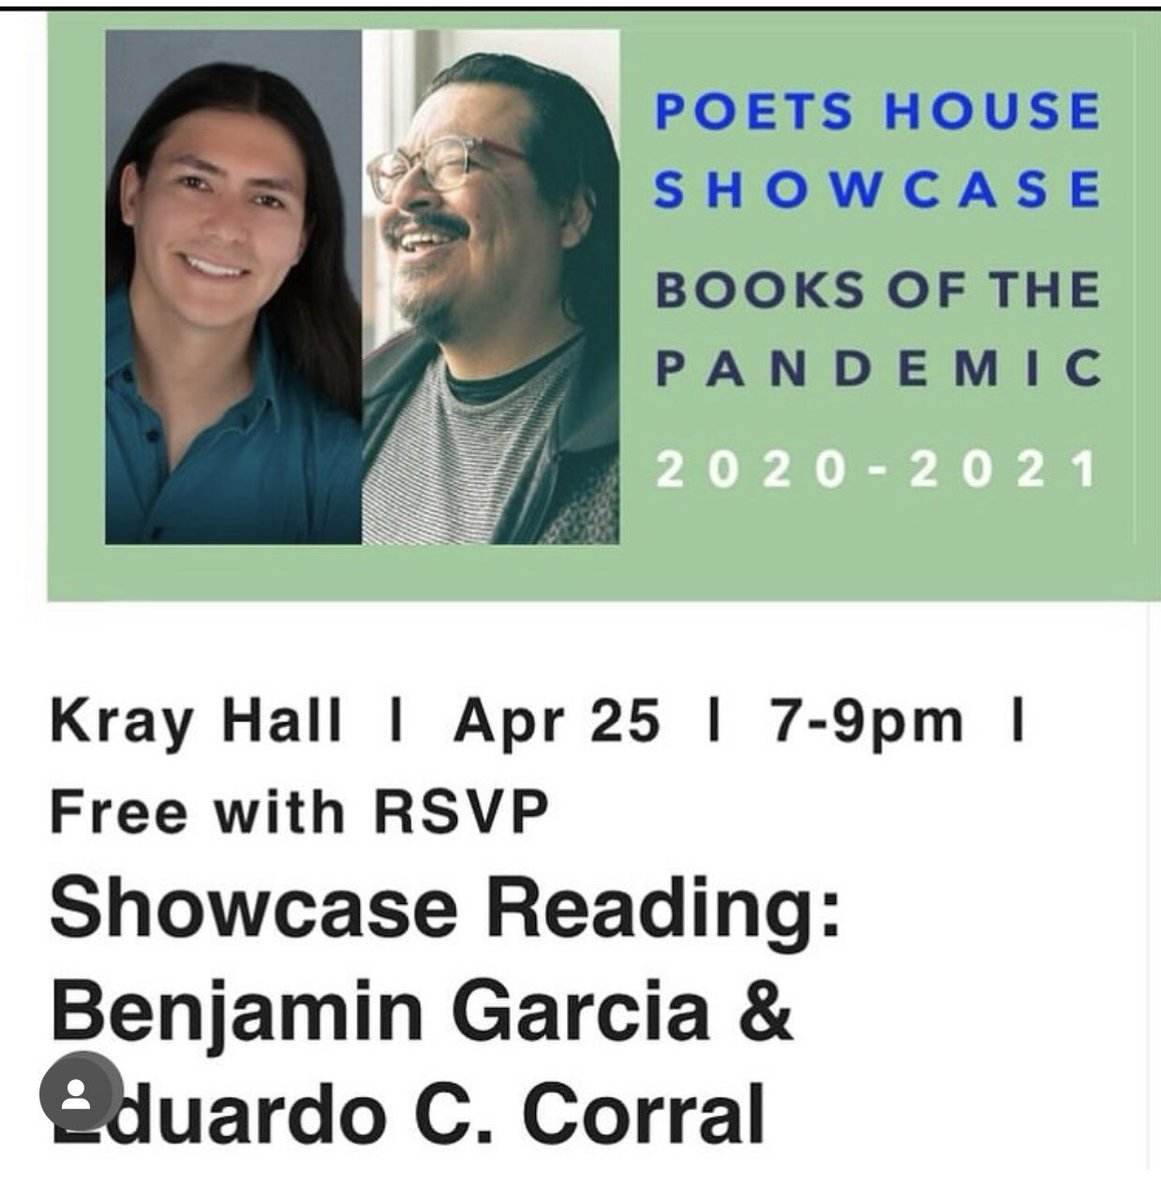 NYers, I’m reading at @poetshouse tomorrow. With Benjamin Garcia! Please join us.